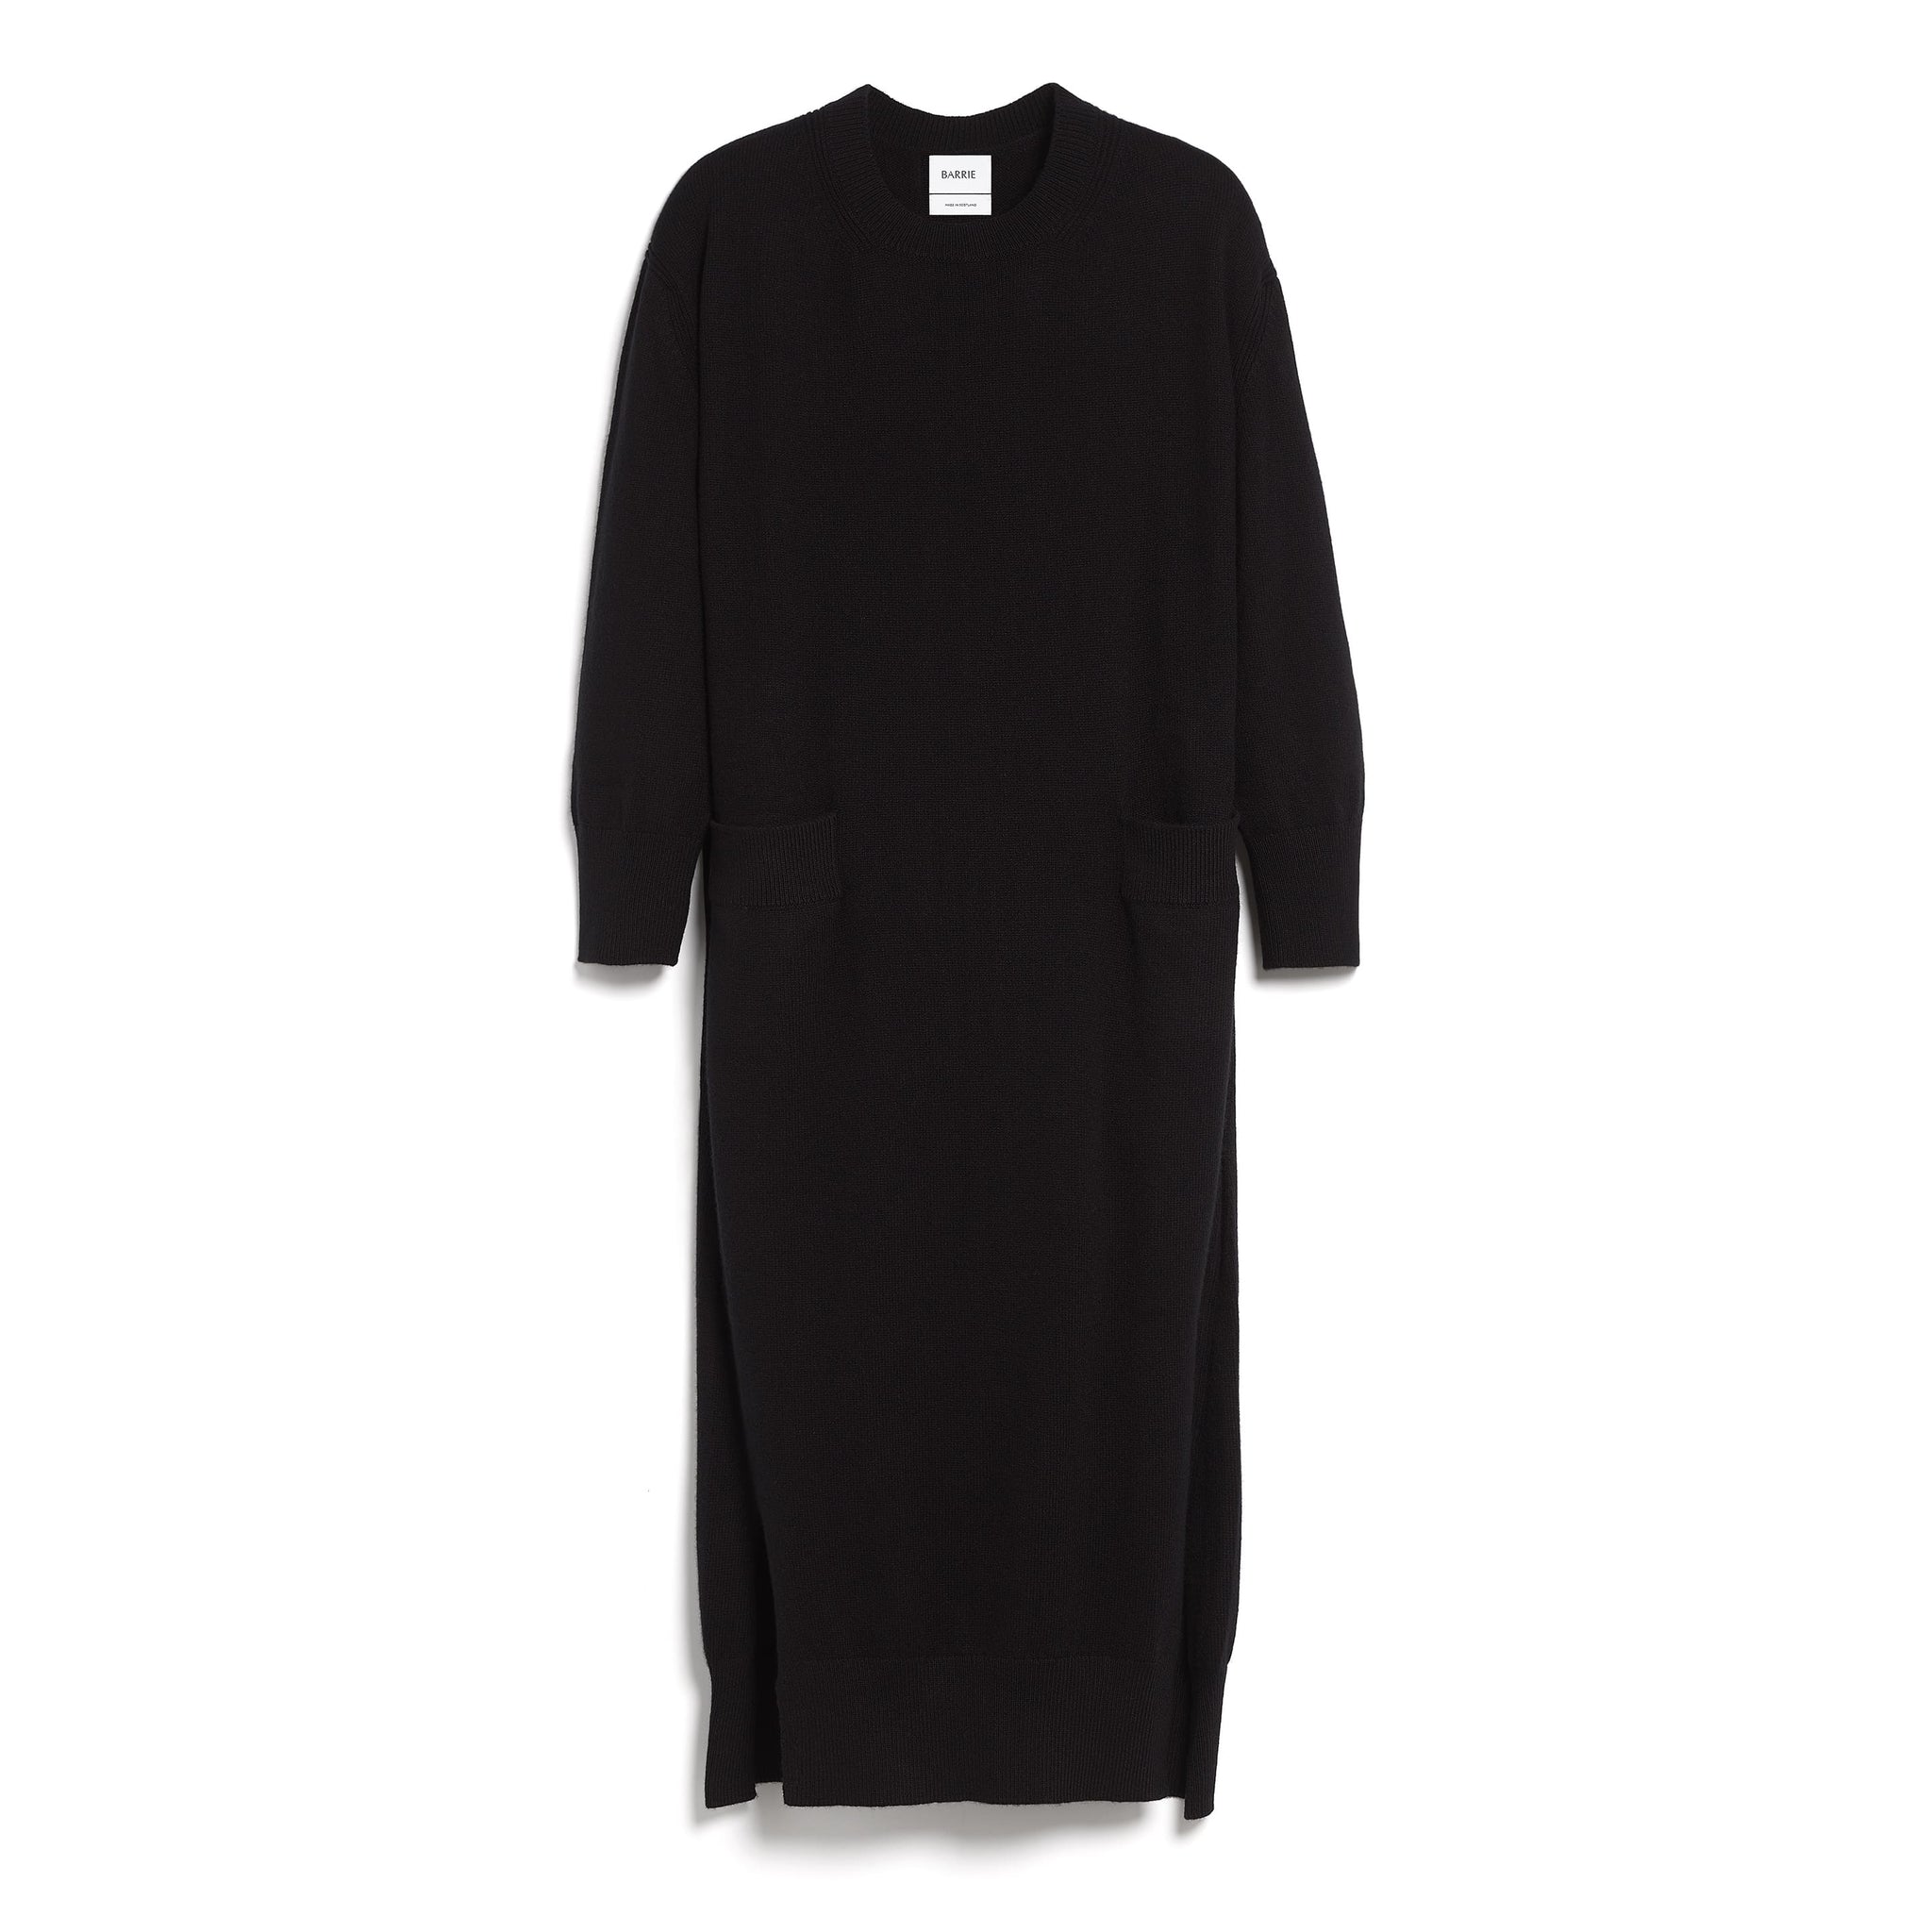 Cashmere dresses and skirts – Barrie.com